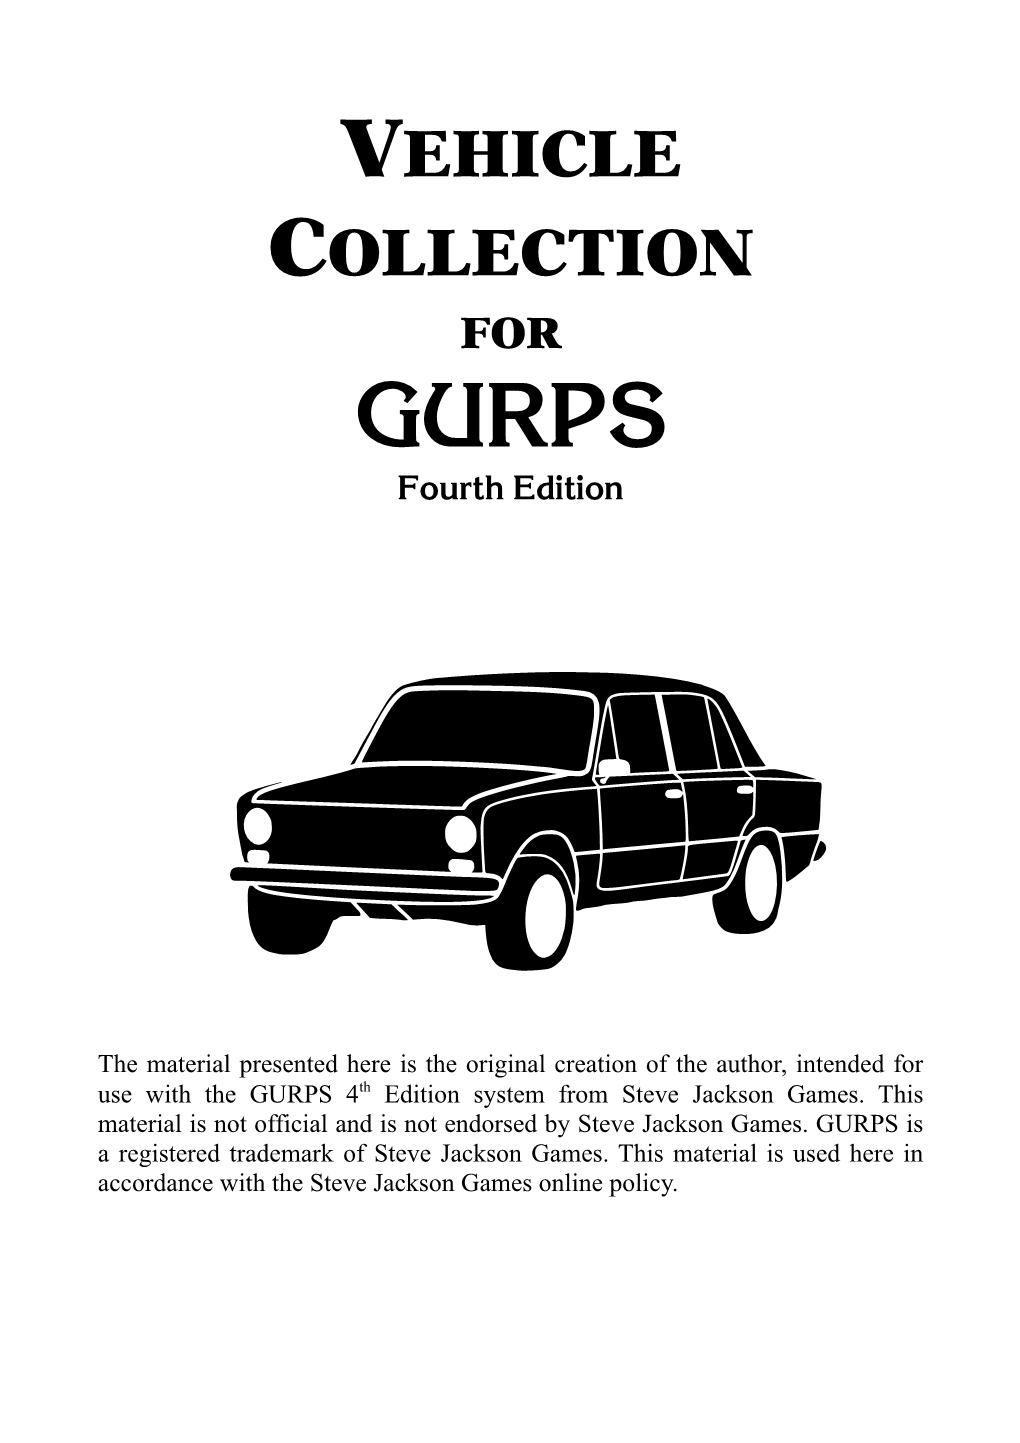 VEHICLE COLLECTION for GURPS Fourth Edition